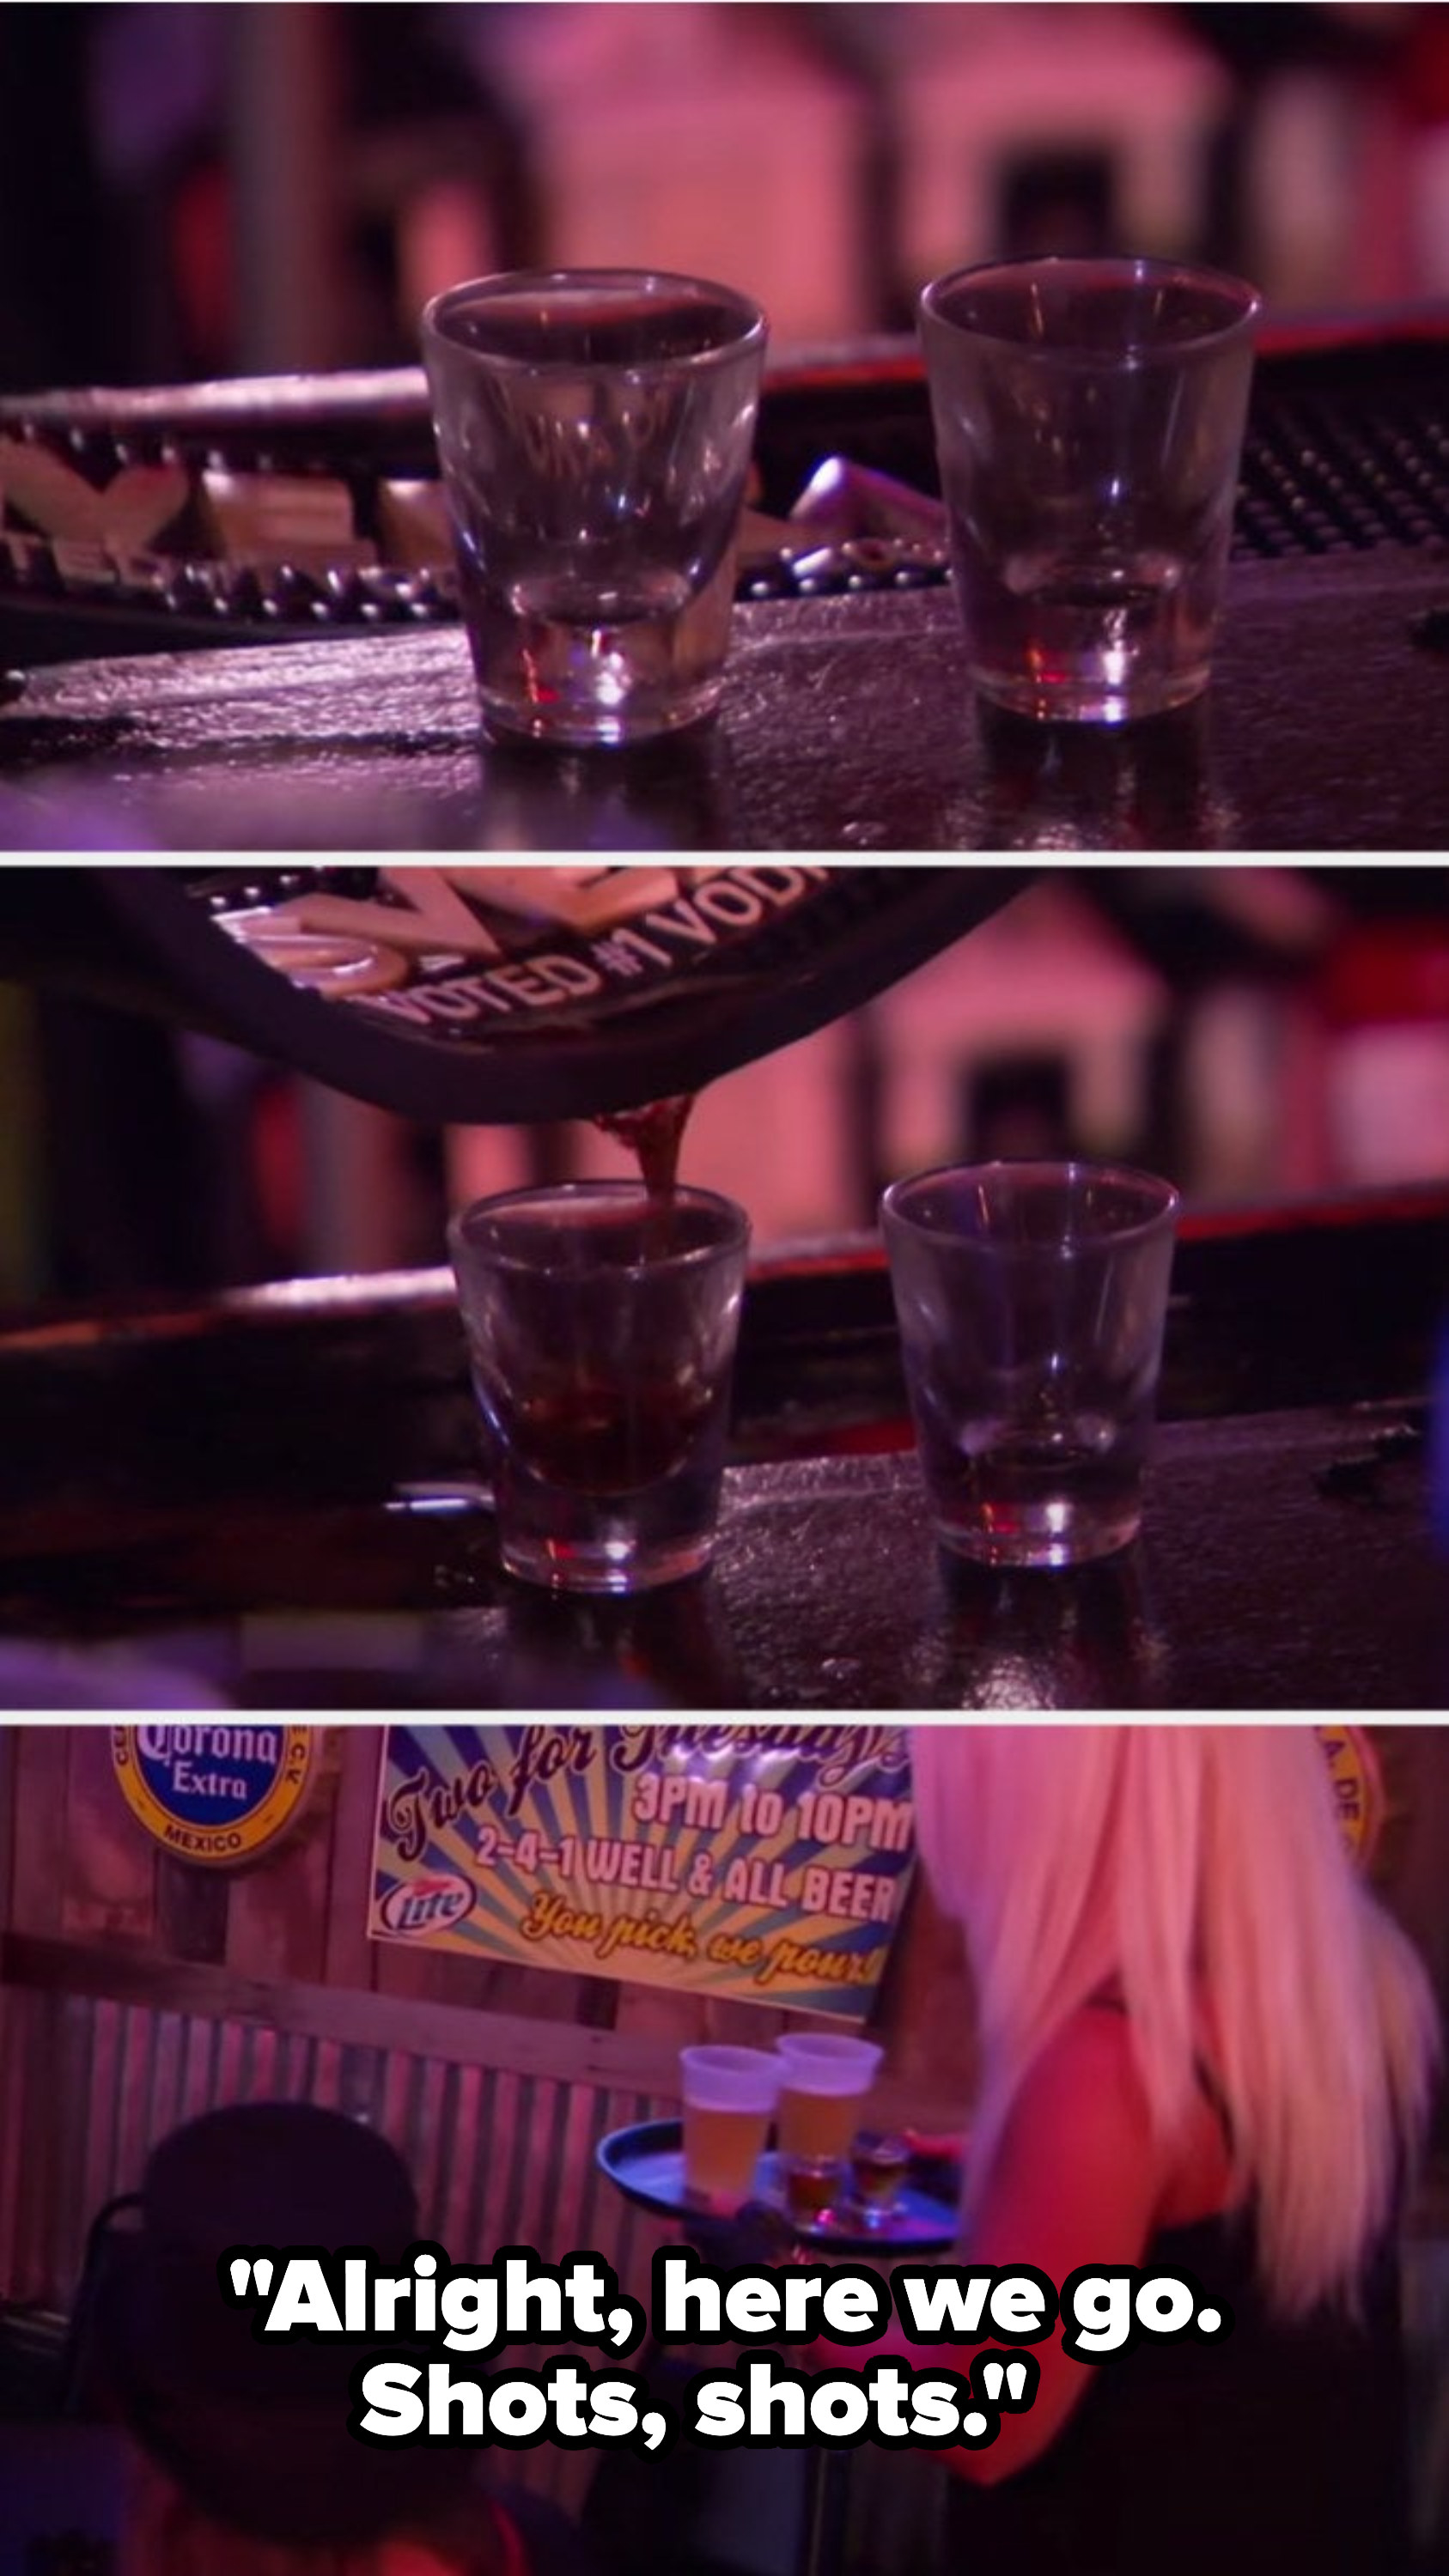 A woman pouring spilt liquor from a bar spill mat into shot glasses and serving them to her friends